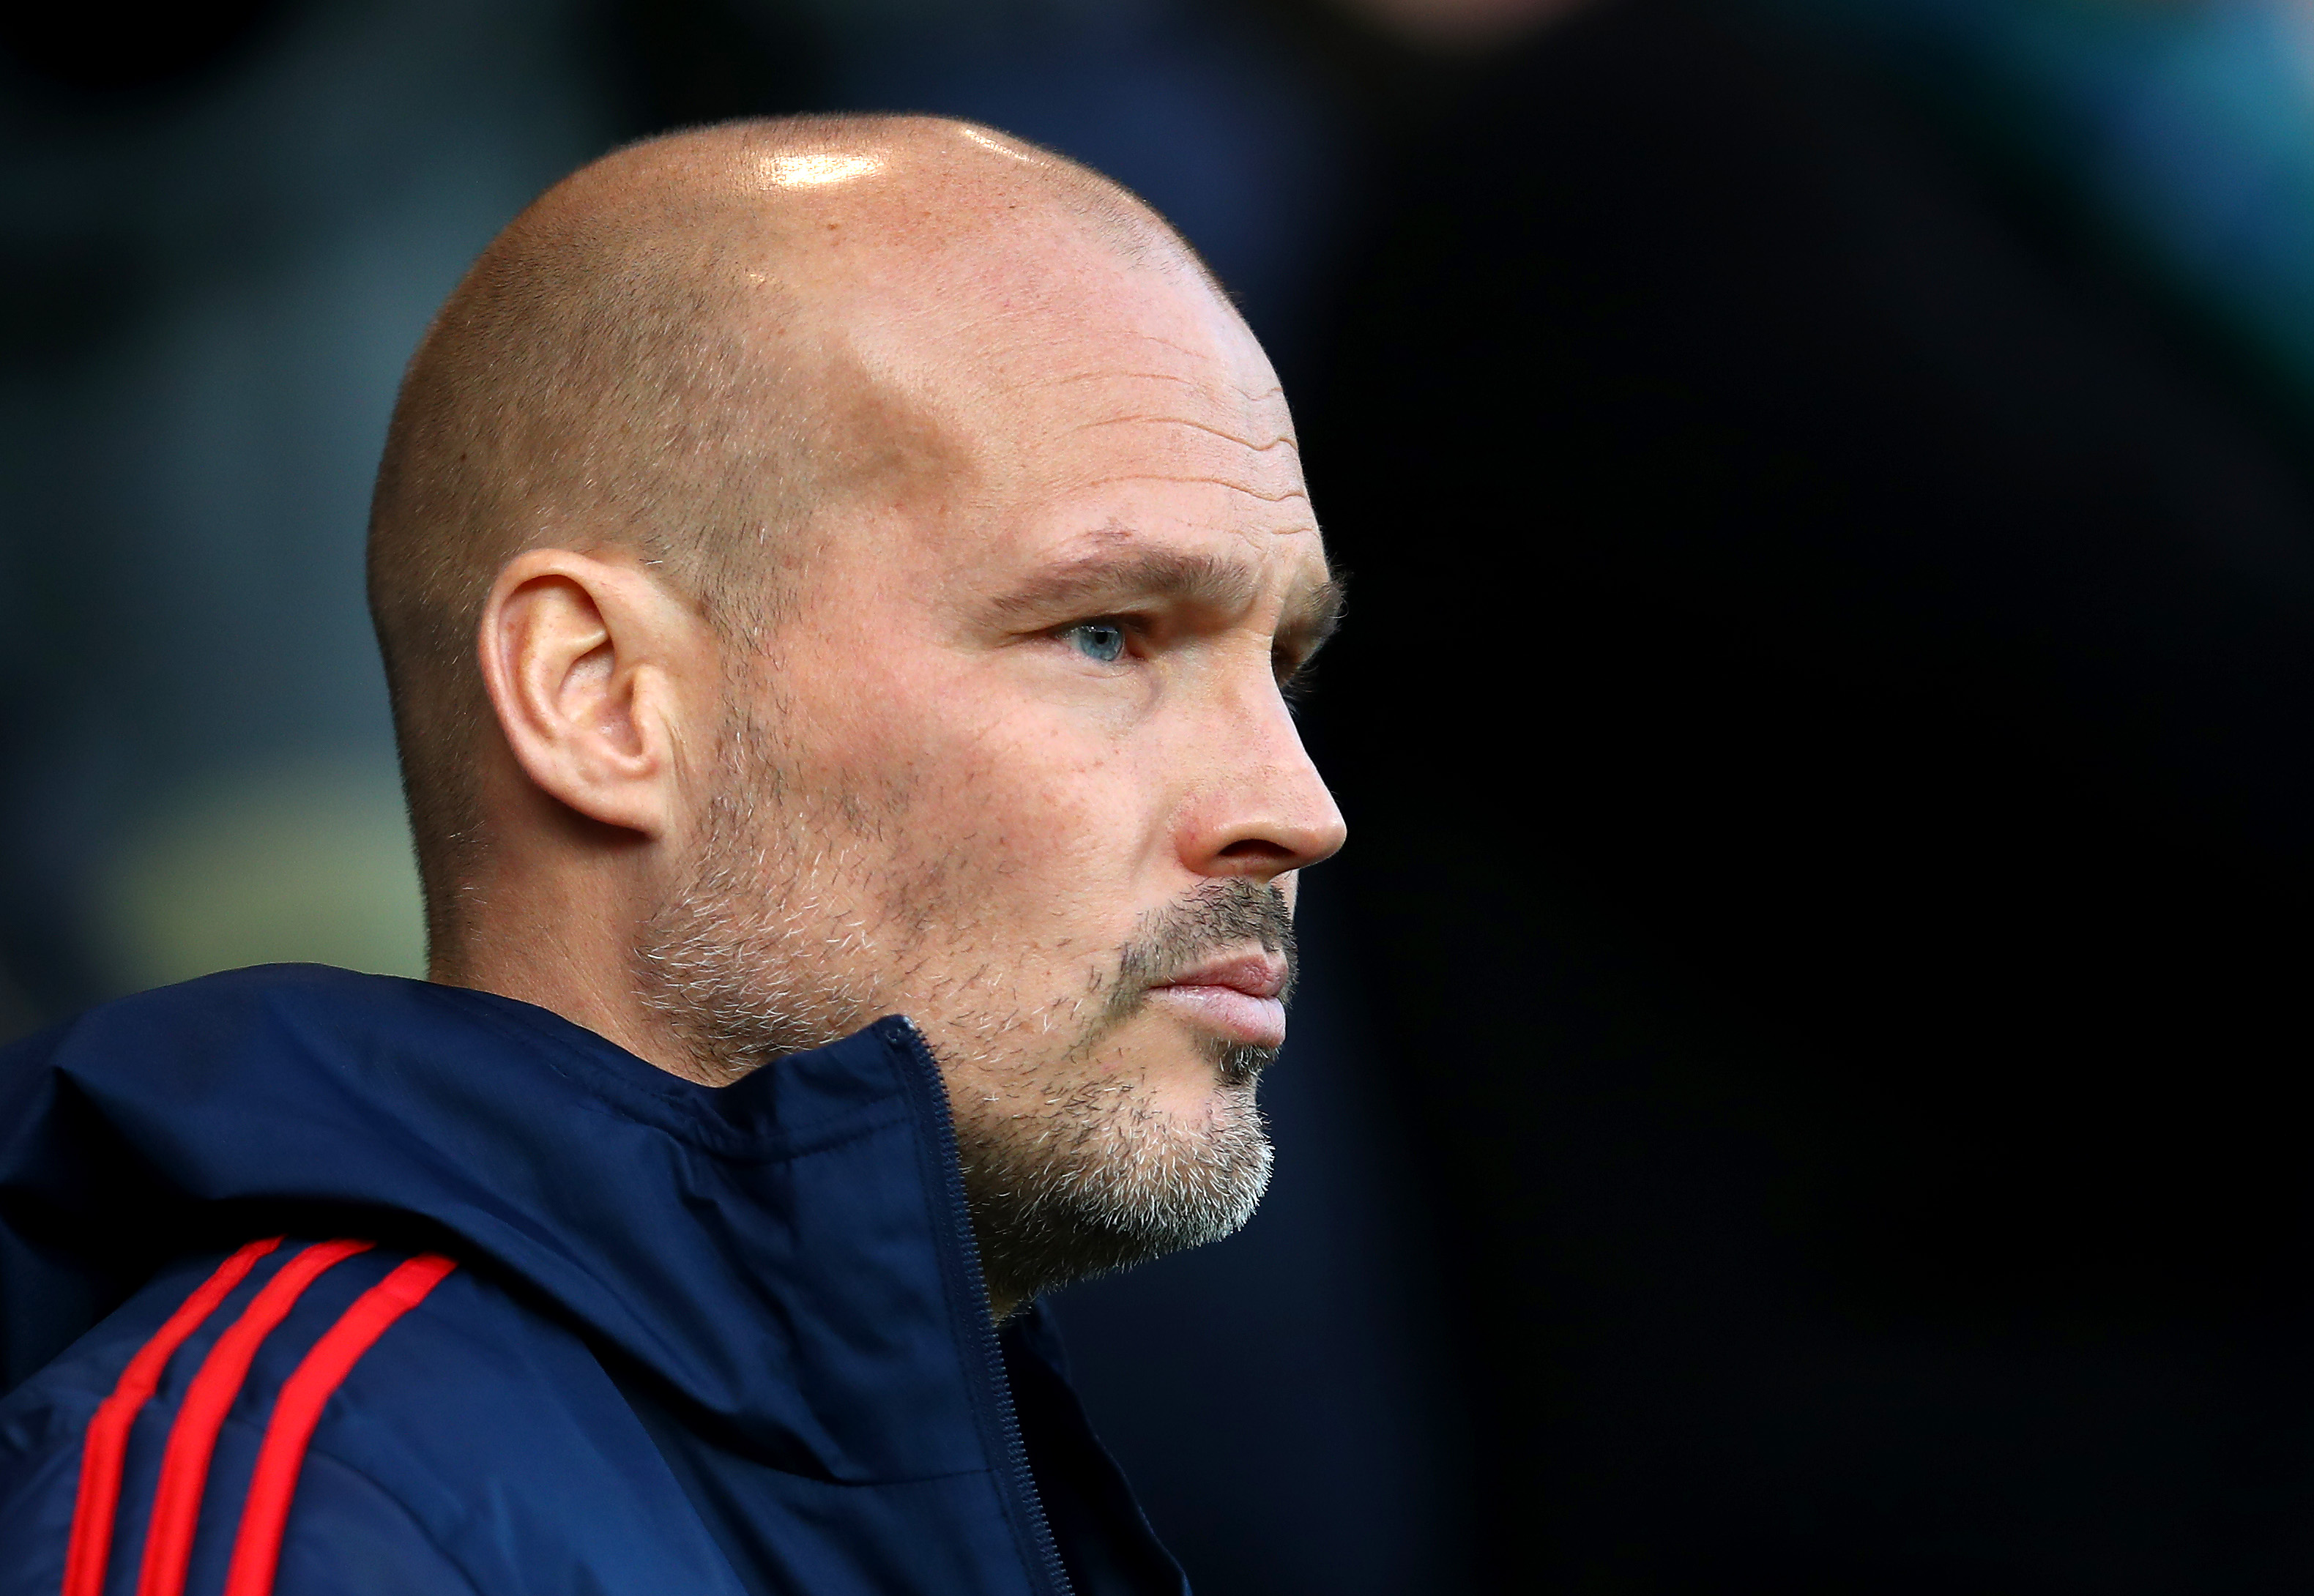 NORWICH, ENGLAND - DECEMBER 01: Interim Manager of Arsenal, Freddie Ljungberg looks on during the Premier League match between Norwich City and Arsenal FC at Carrow Road on December 01, 2019 in Norwich, United Kingdom. (Photo by Julian Finney/Getty Images)